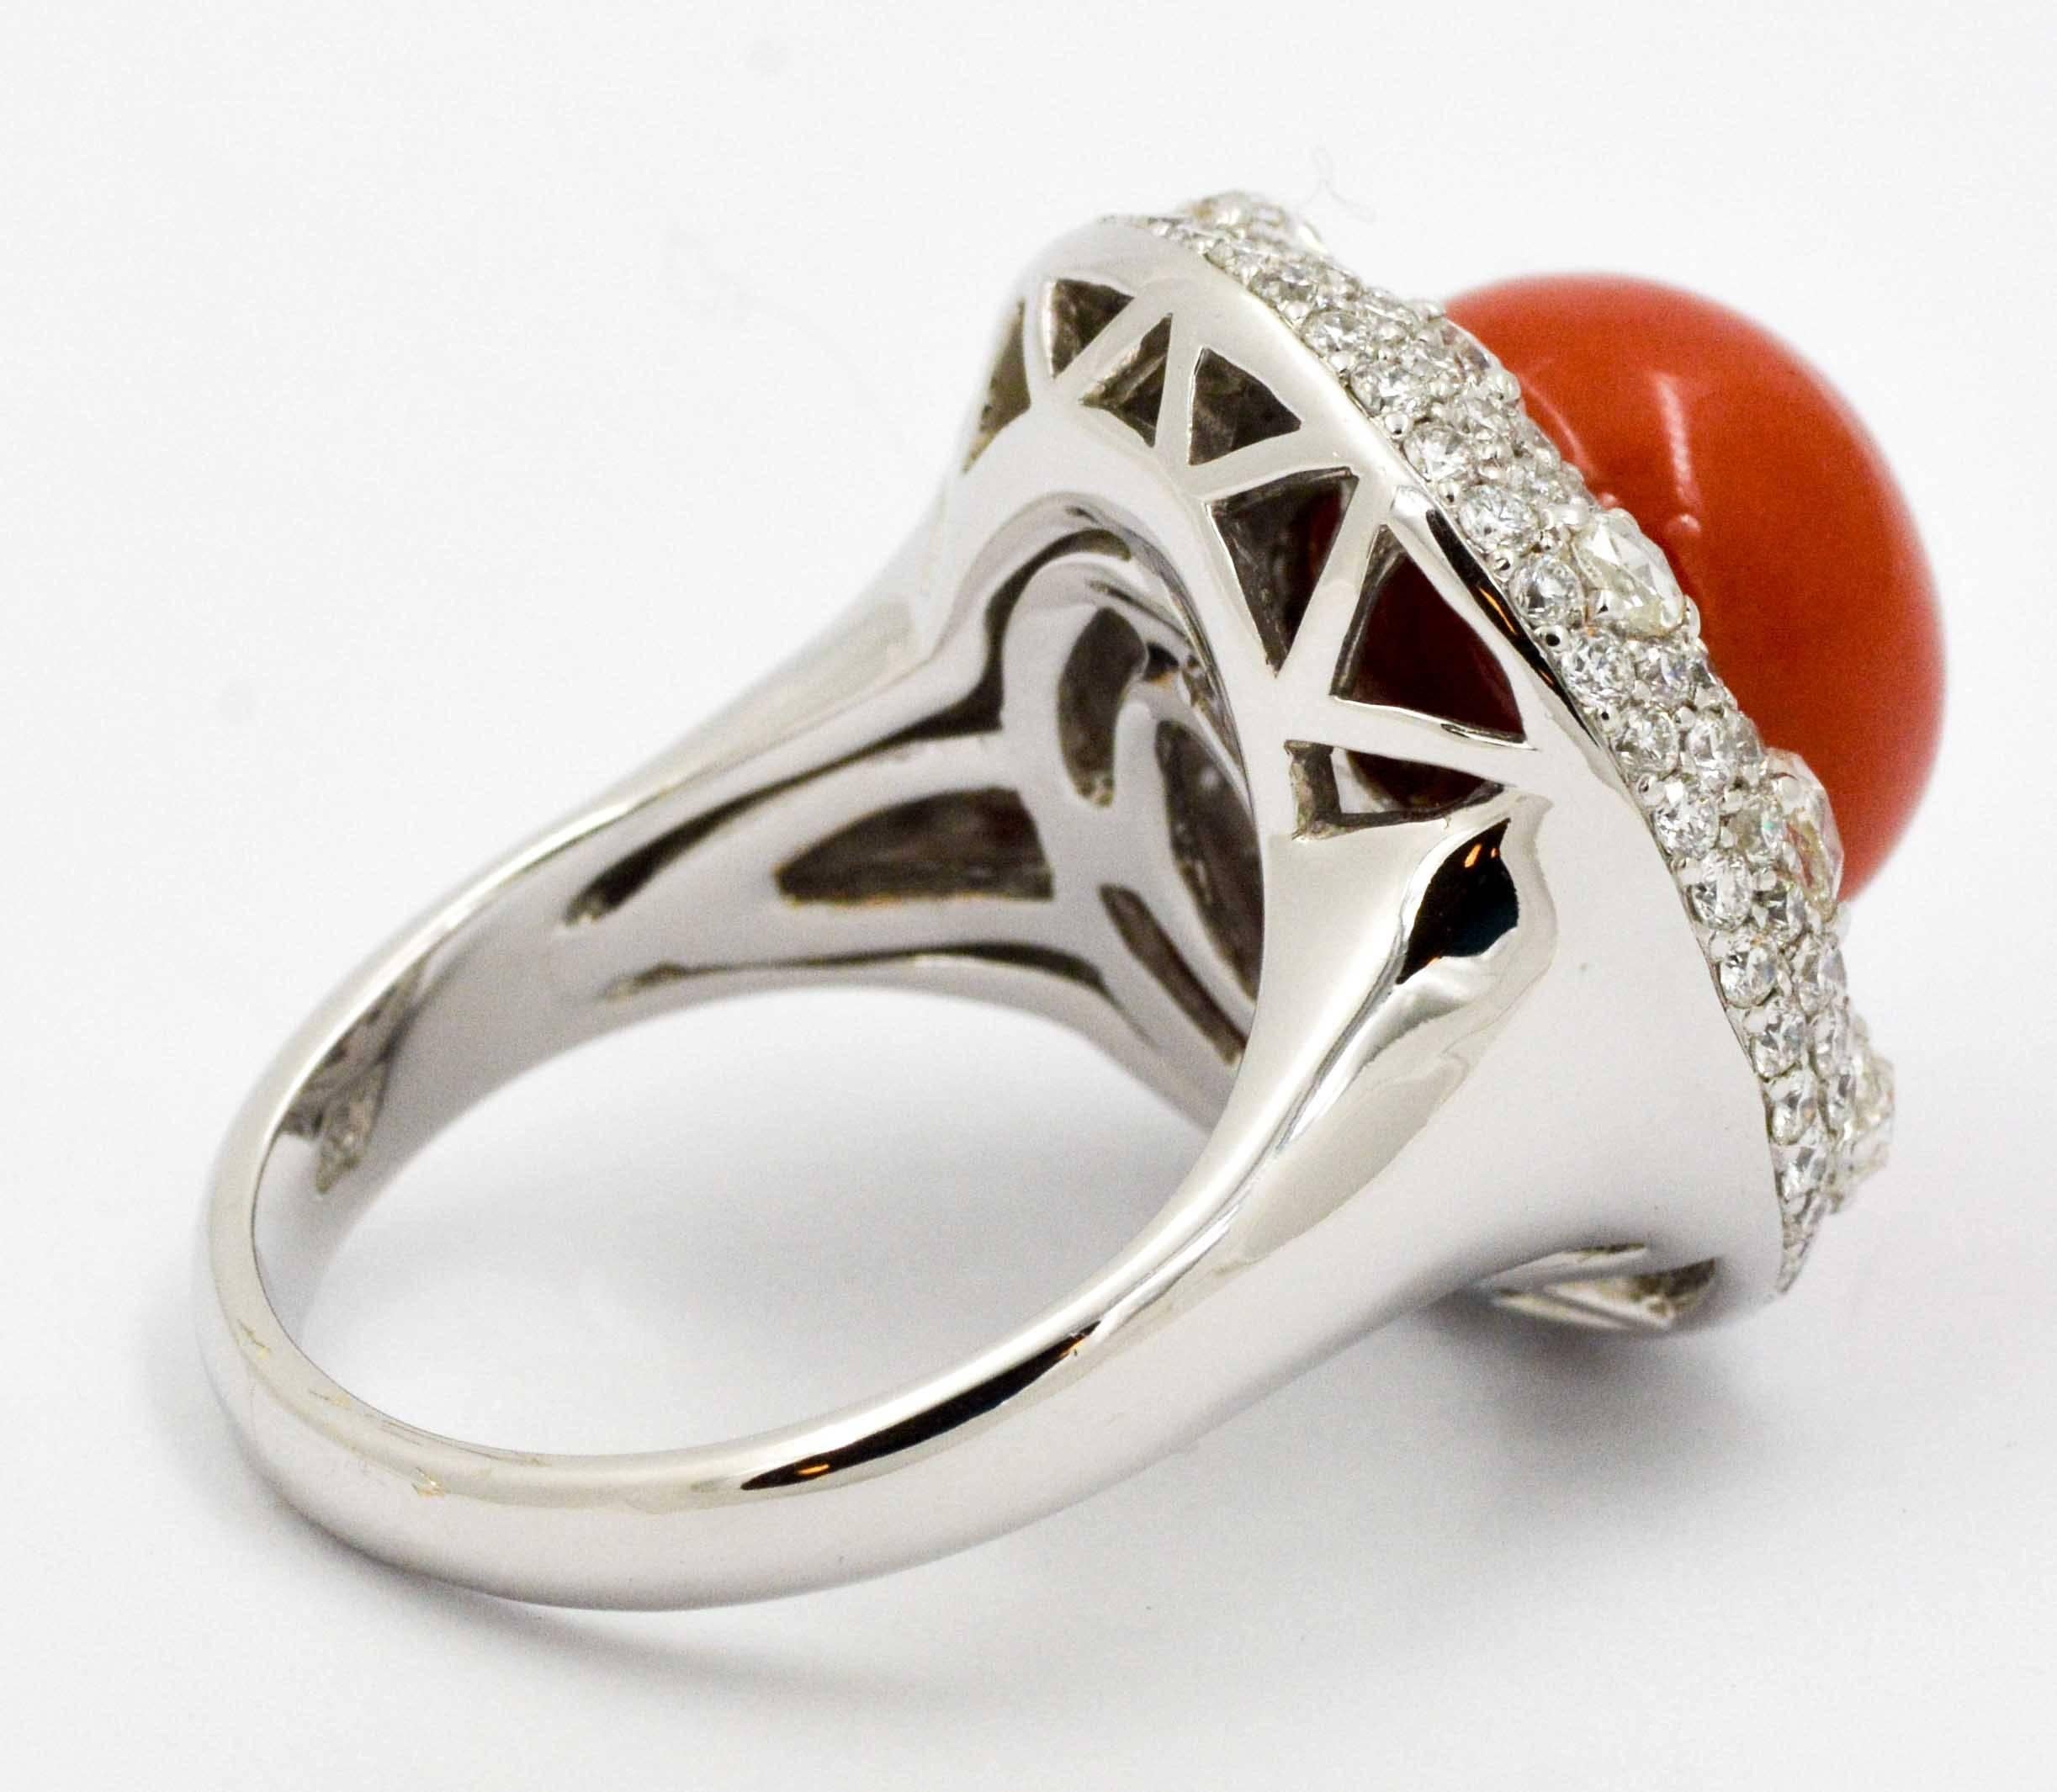 The perfect blend of sophistication and romance describe this stunning 18 karat white gold Torro Del ring with an amazing 12.34 mm red coral bead in its center. This red coral is vibrant in its color saturation.  The red coral is accented with a